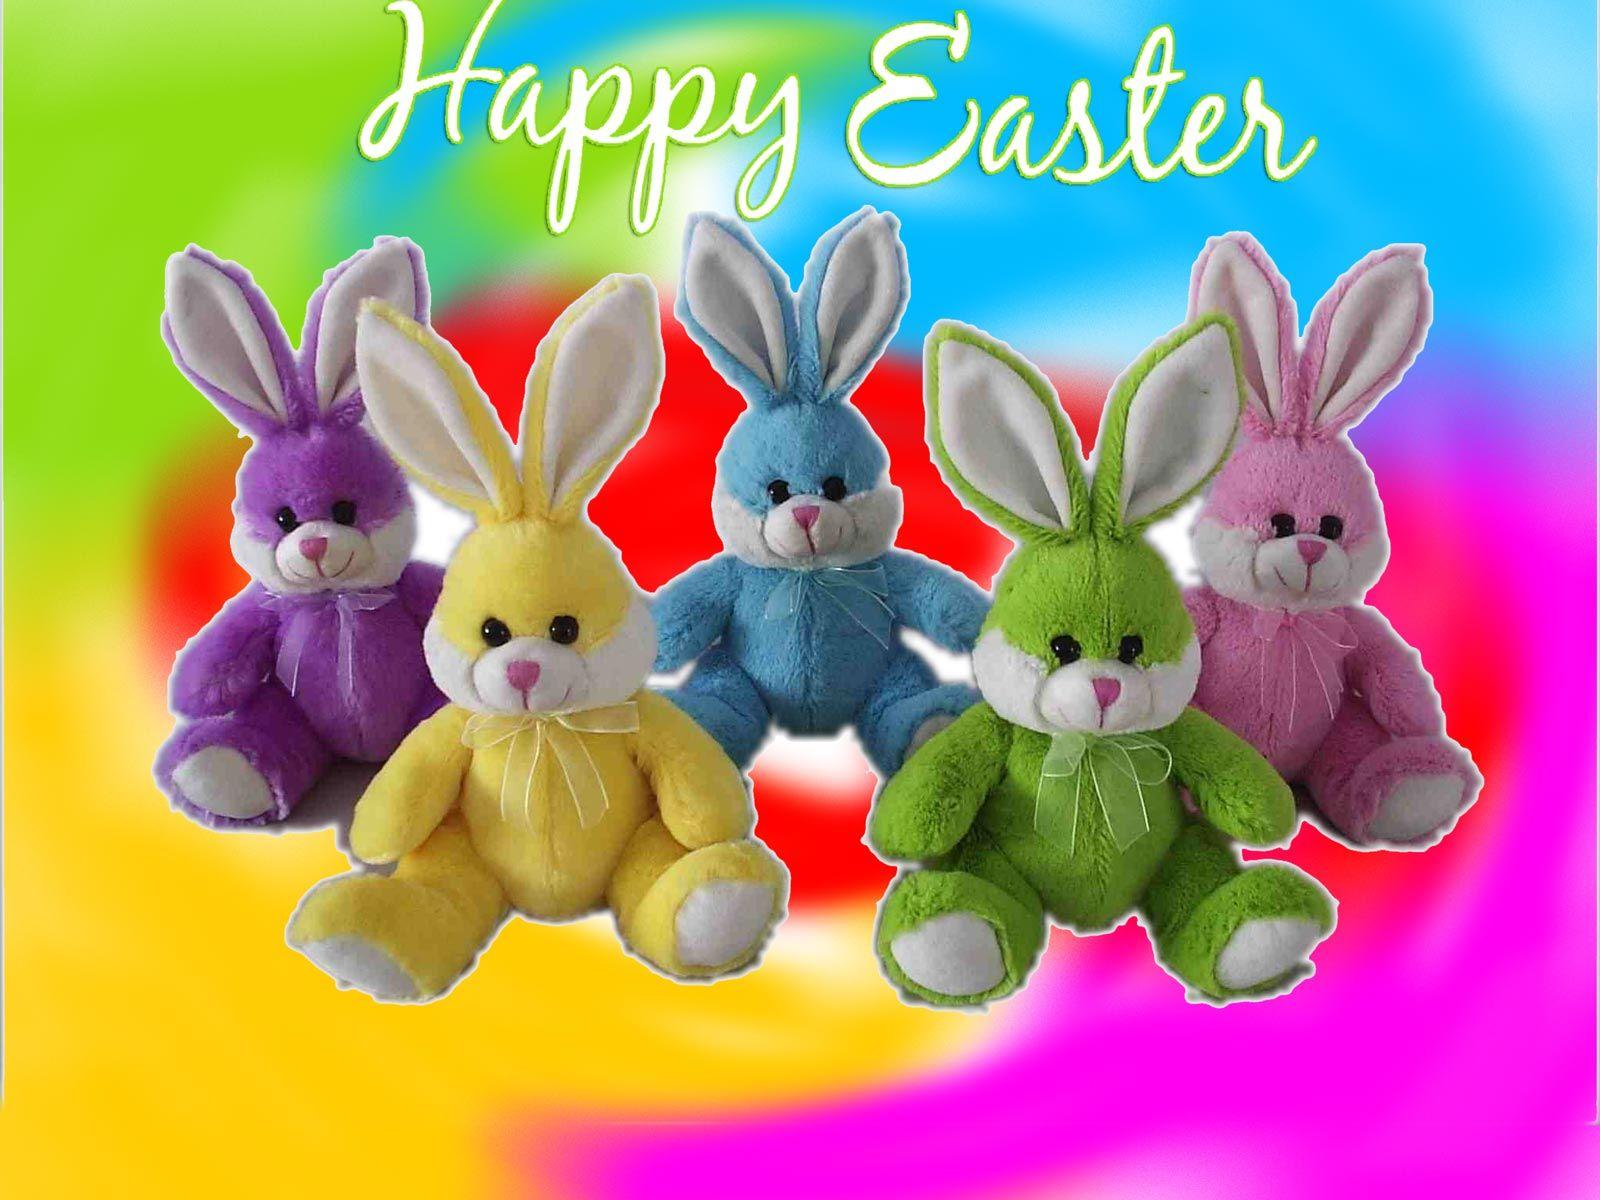 Easter Bunnies 2018 HD Wallpaper And Image Download Free